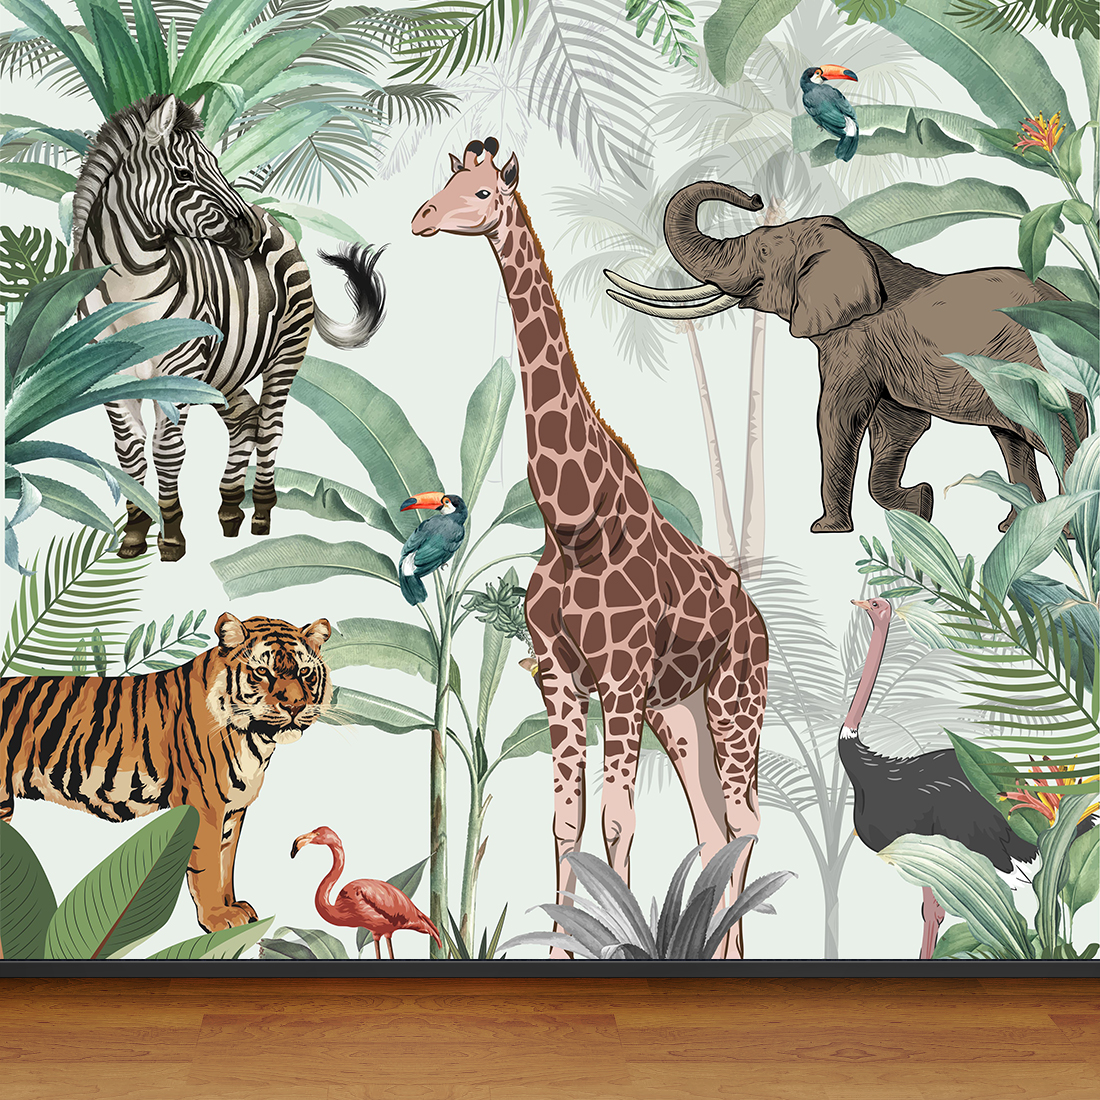 Transform Your Childs Room with Captivating Jungle Wallpaper Murals   Paper Plane Design